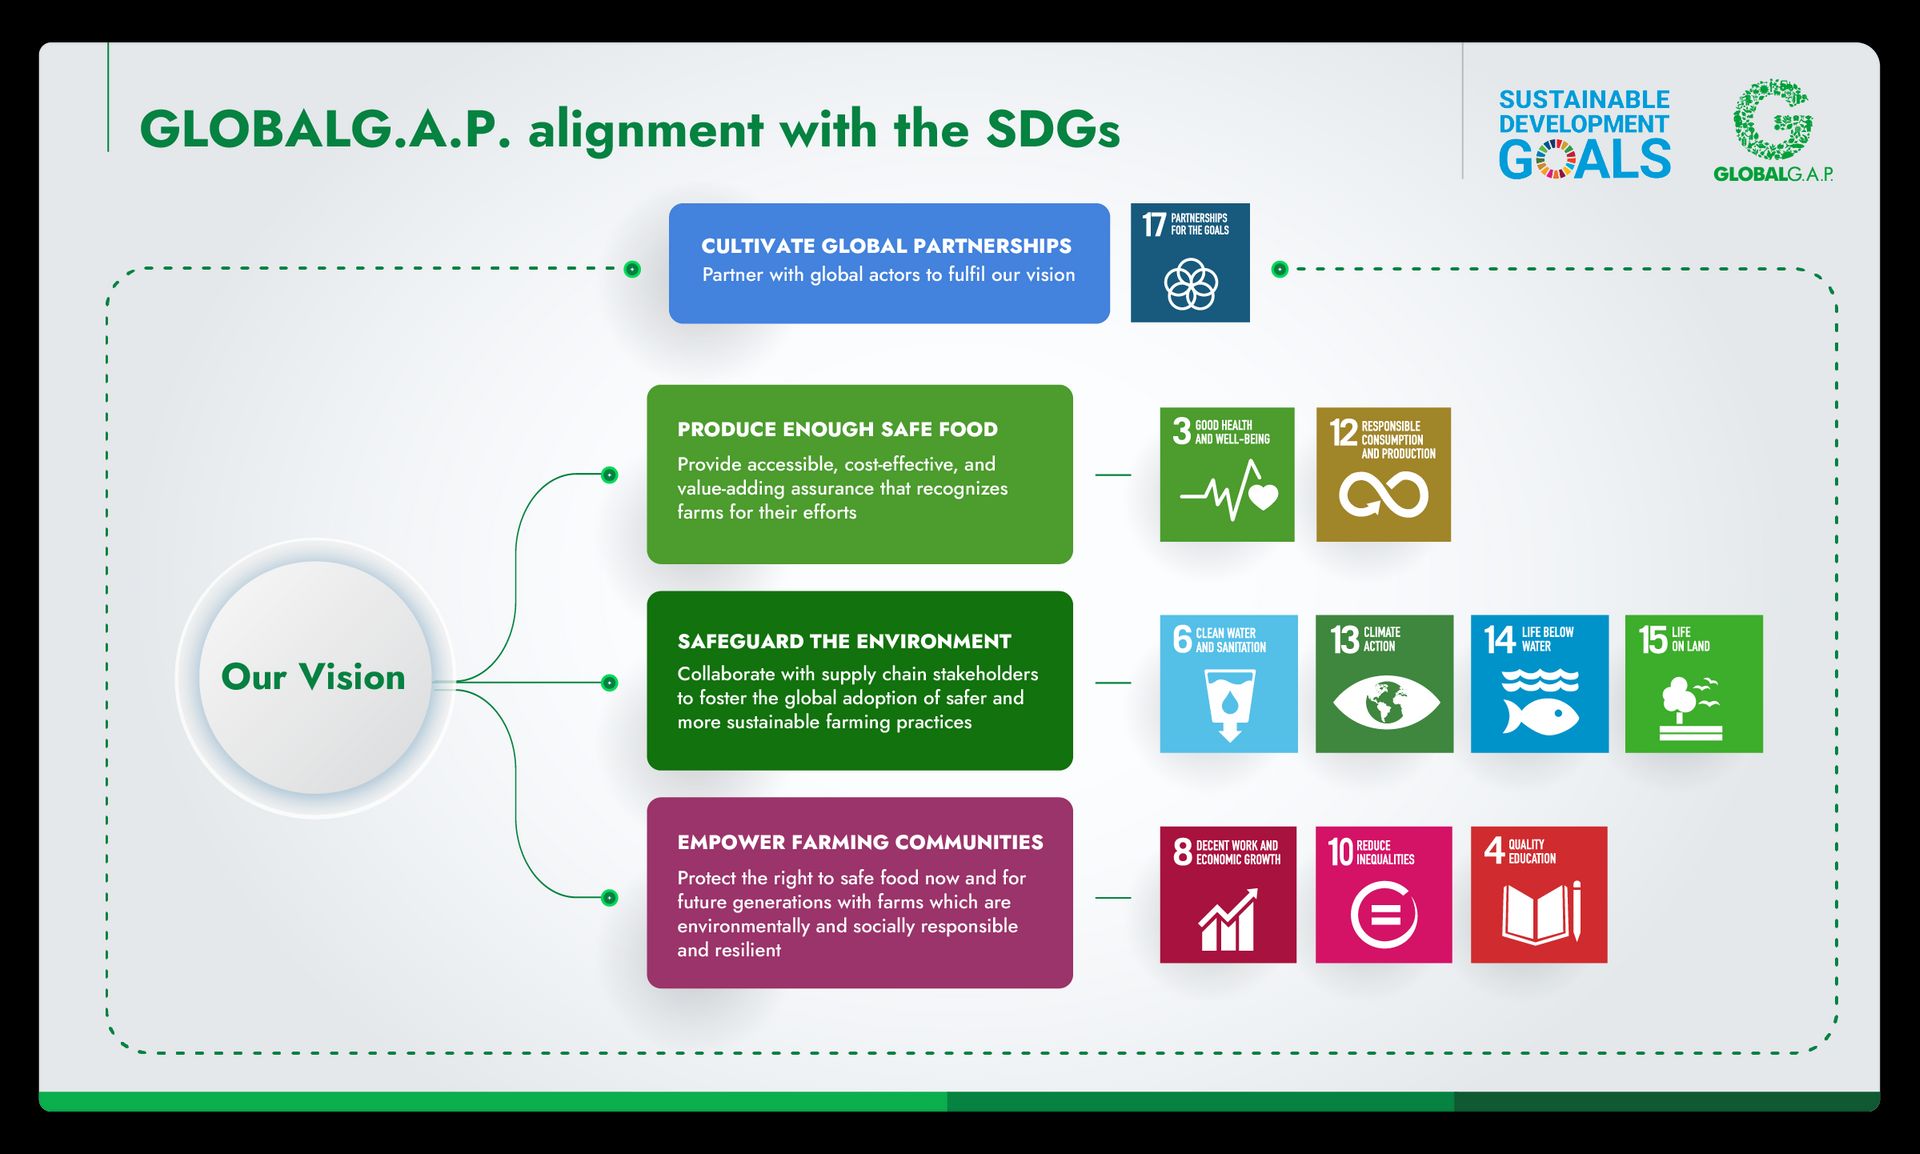 Infographic showing how the GLOBALG.A.P. vision supports the Sustainable Development Goals